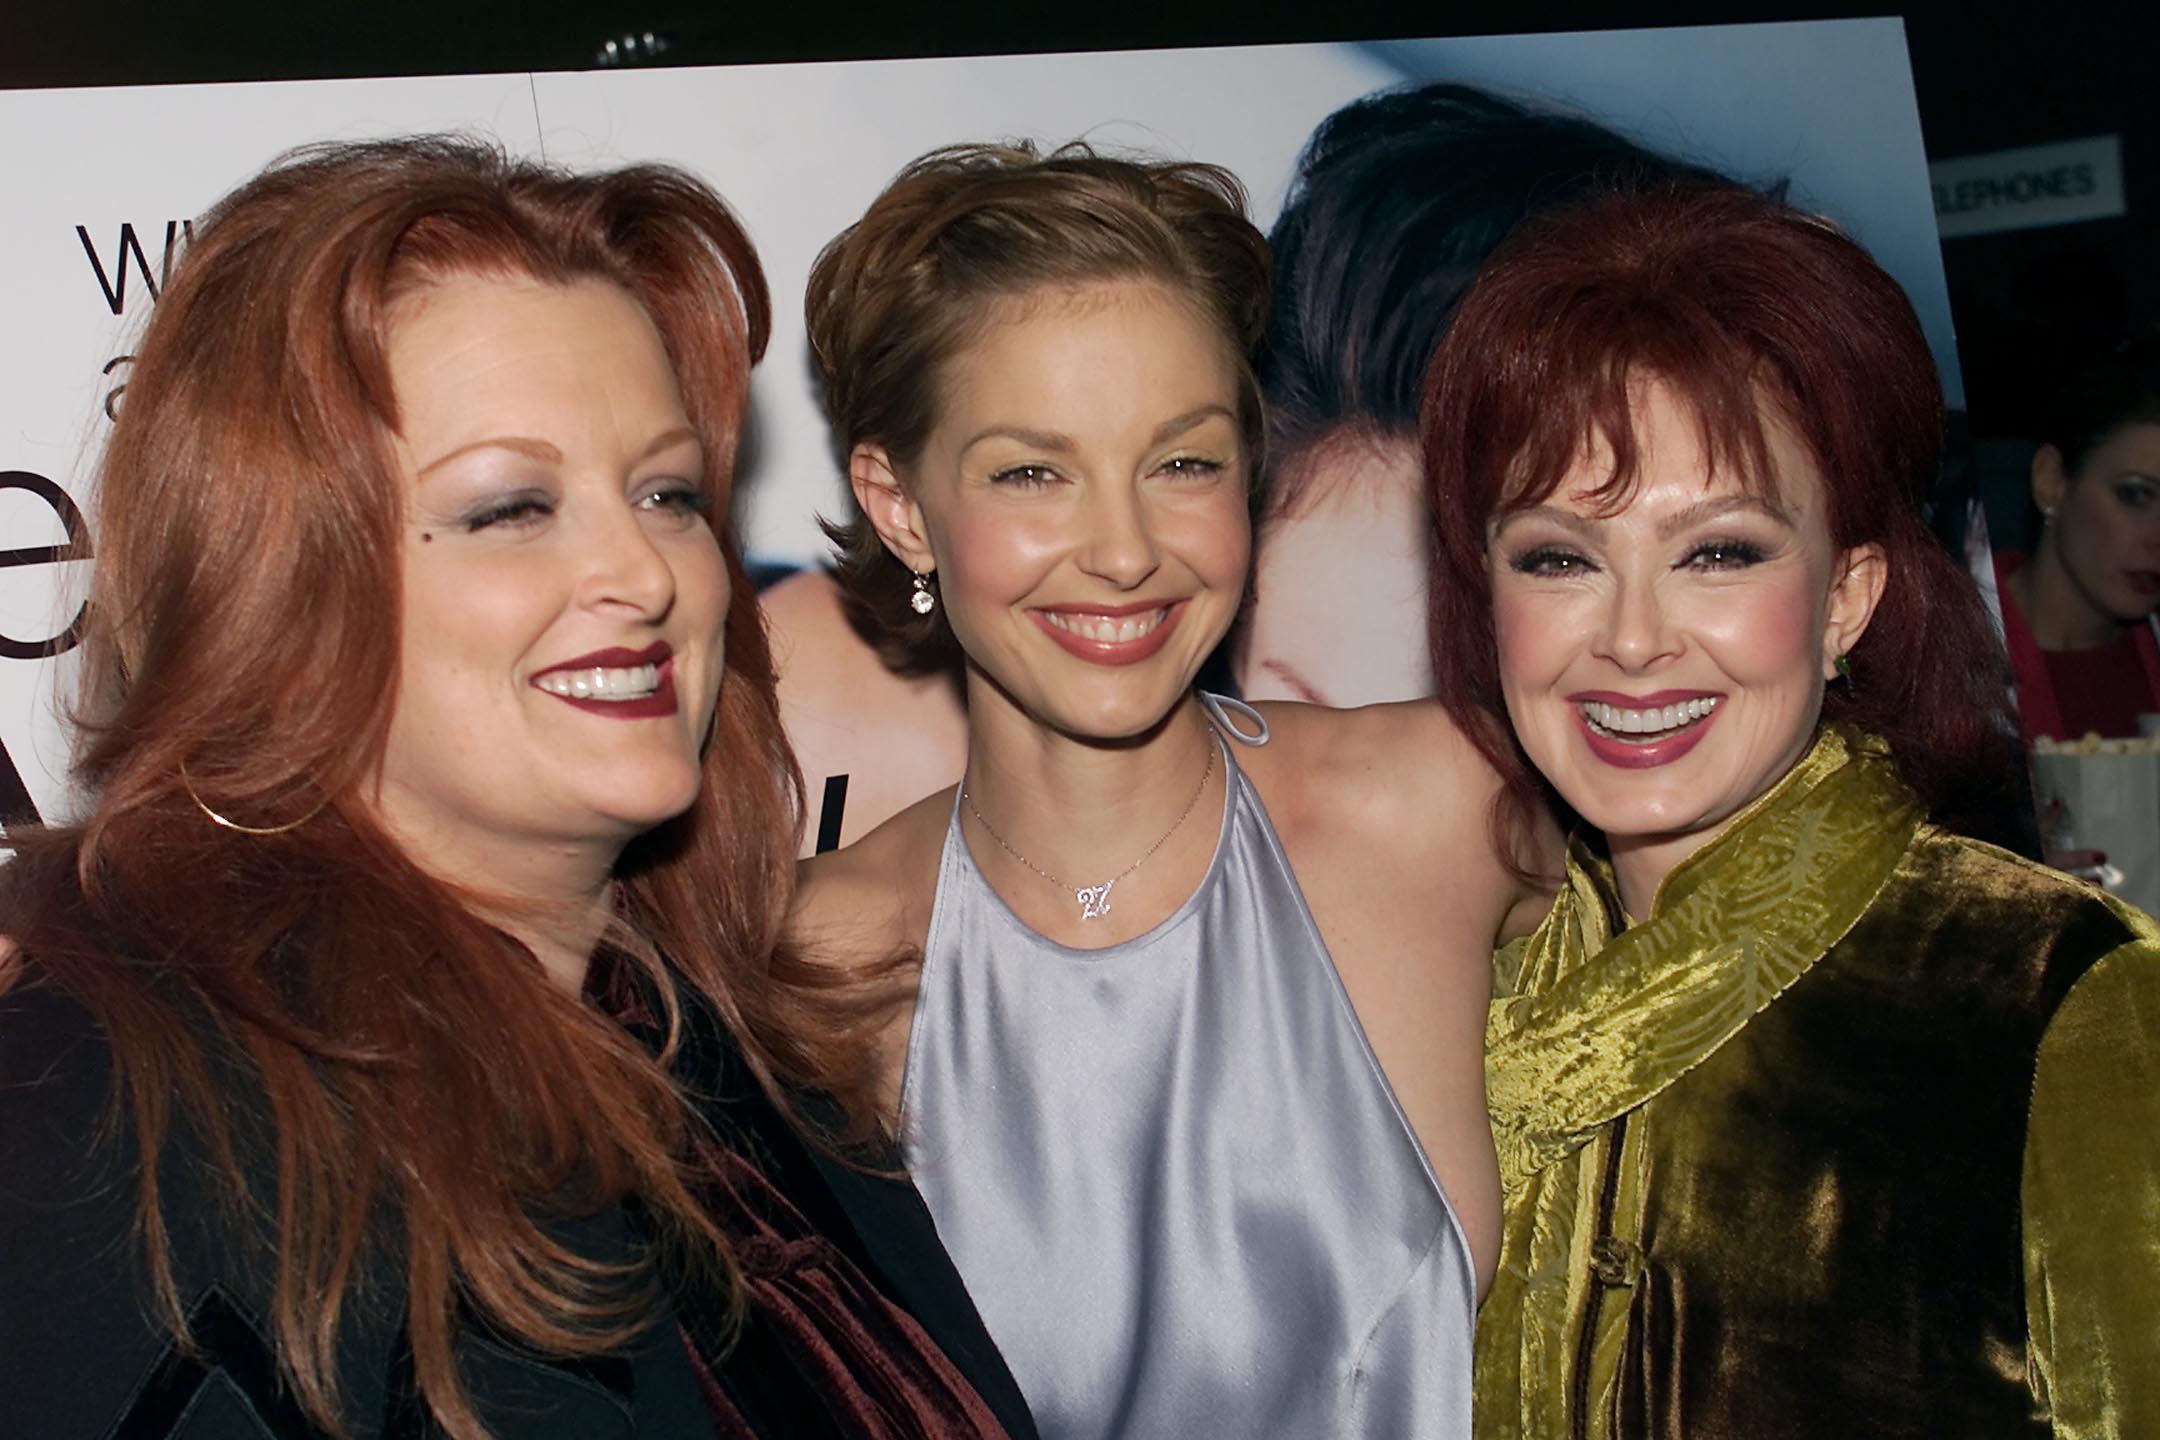 Singer Wynonna Judd, actress Ashely Judd with their mother, country singer Naomi Judd on March 28, 2001 in New York City. | Source: Getty Images